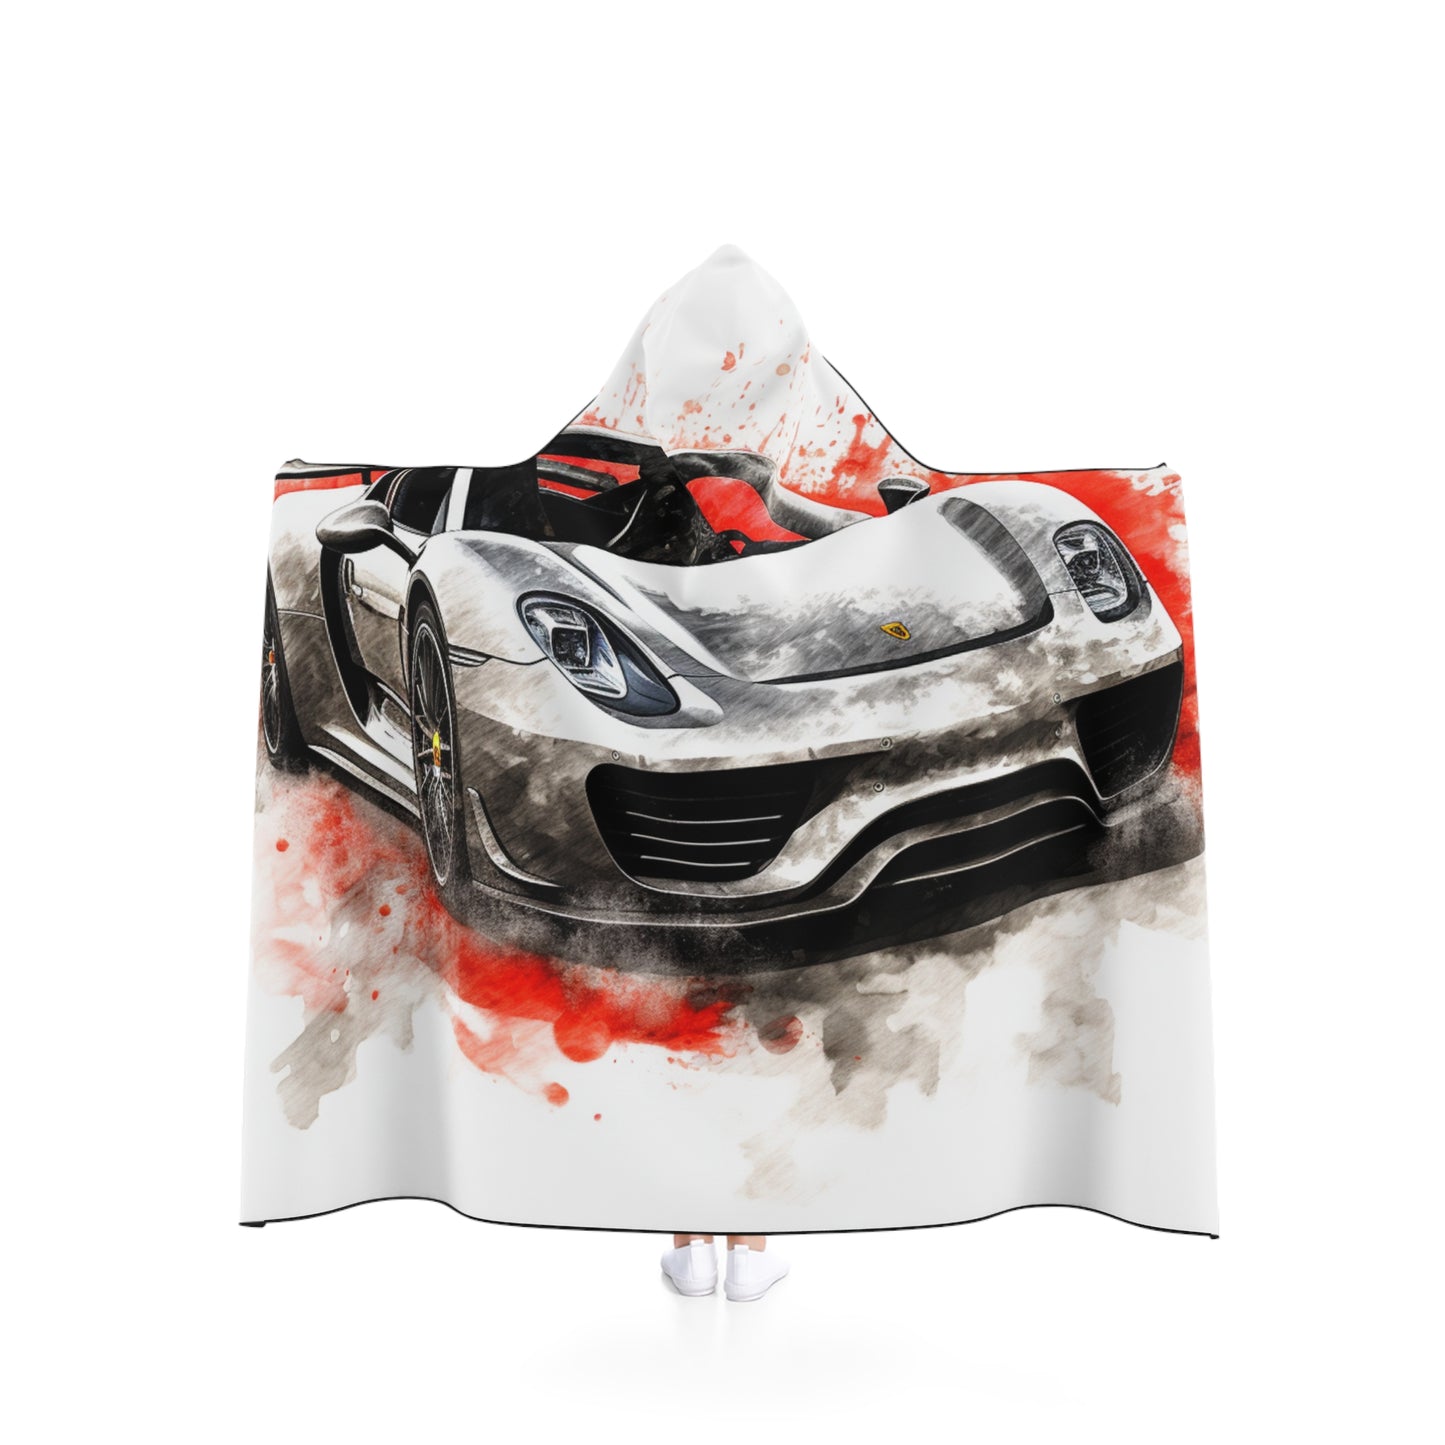 Hooded Blanket 918 Spyder white background driving fast with water splashing 4